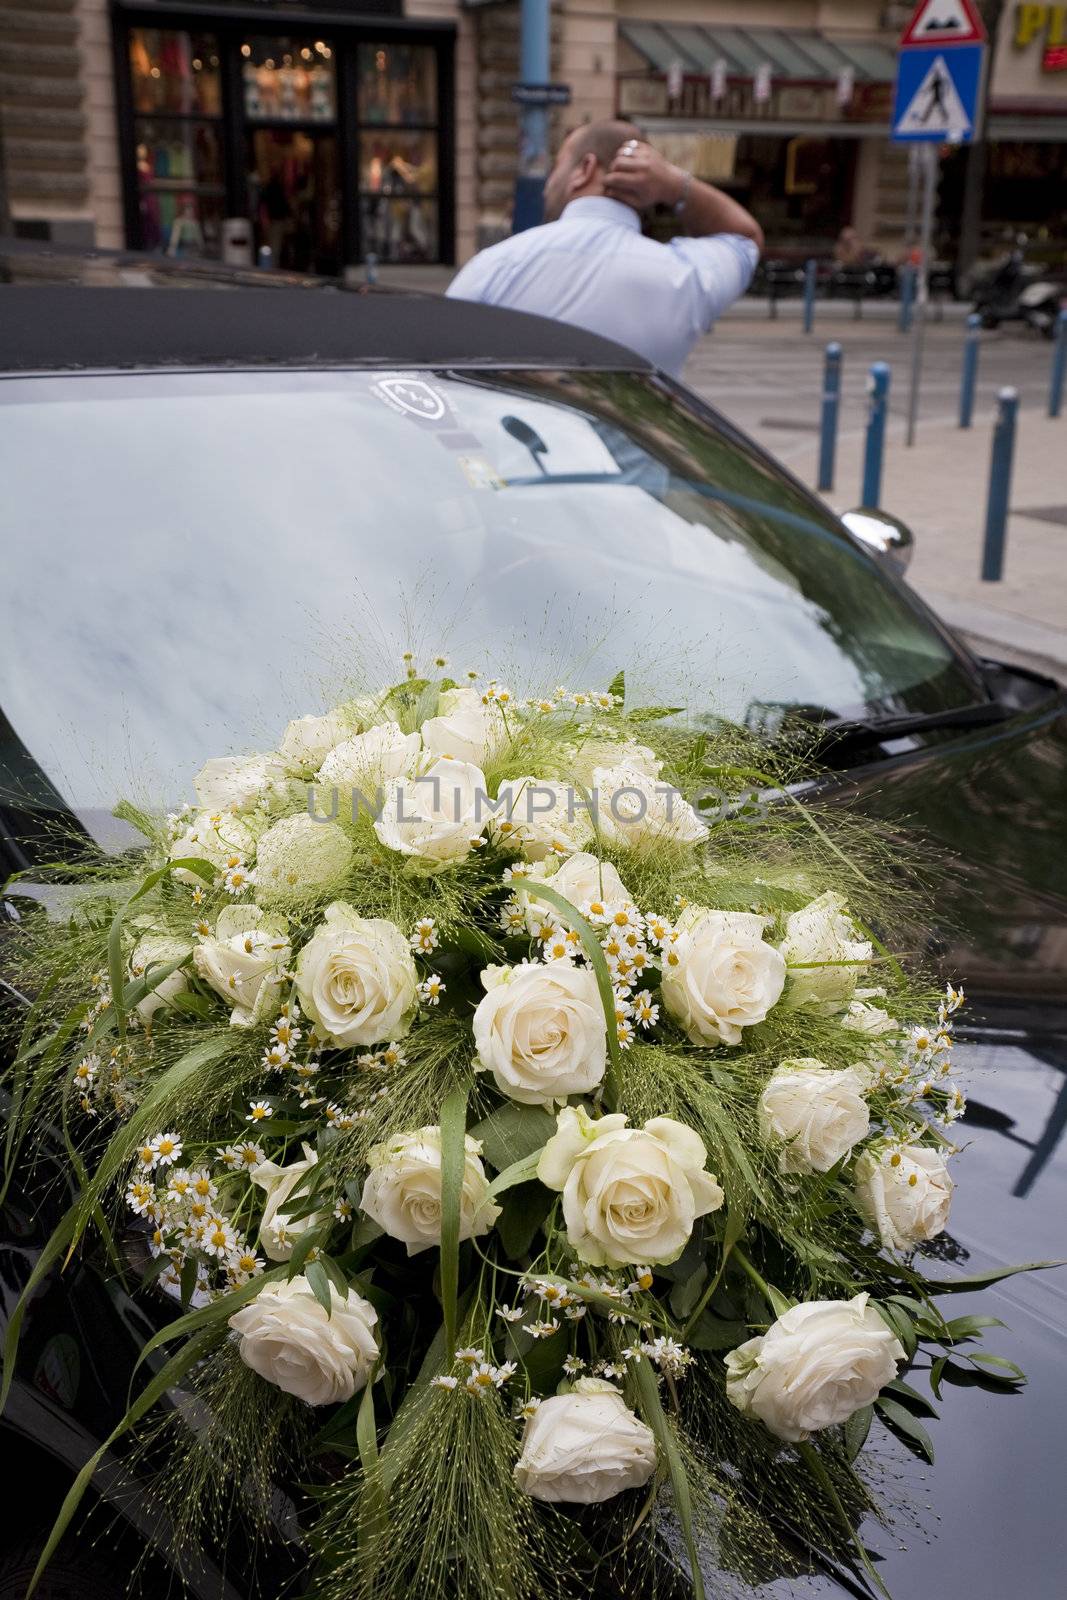 Decorated limousine and driver waiting for the bride in city.